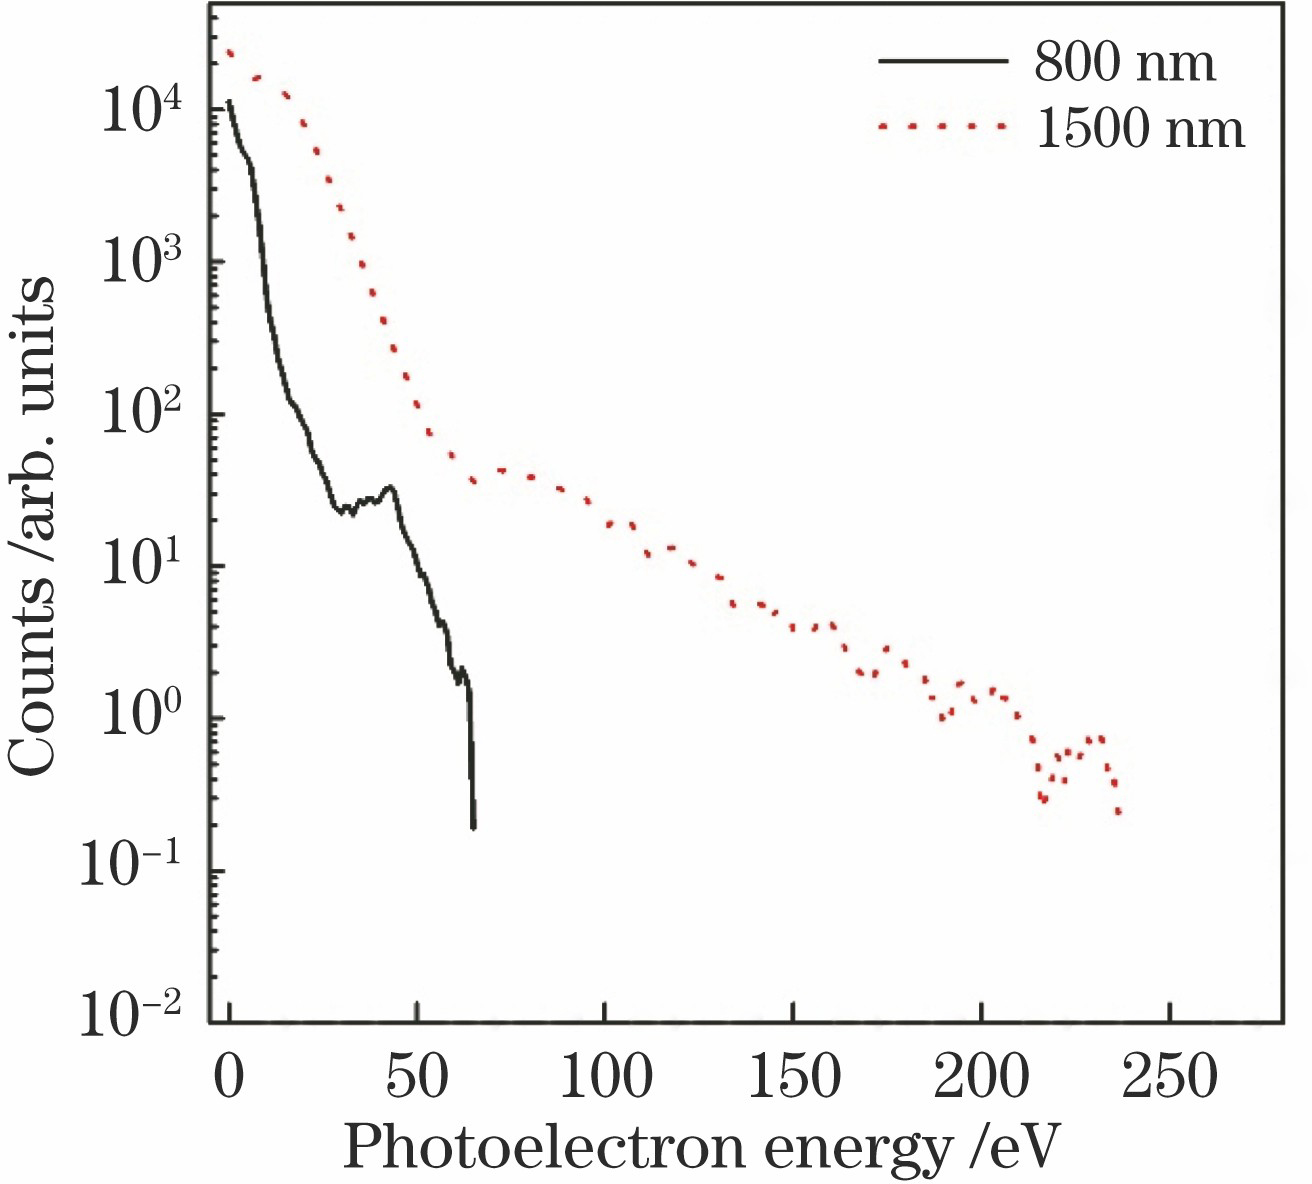 Experimental photoelectron spectra of Xe ionized by the linearly polarized laser field at the two wavelengths of 800 nm and 1500 nm